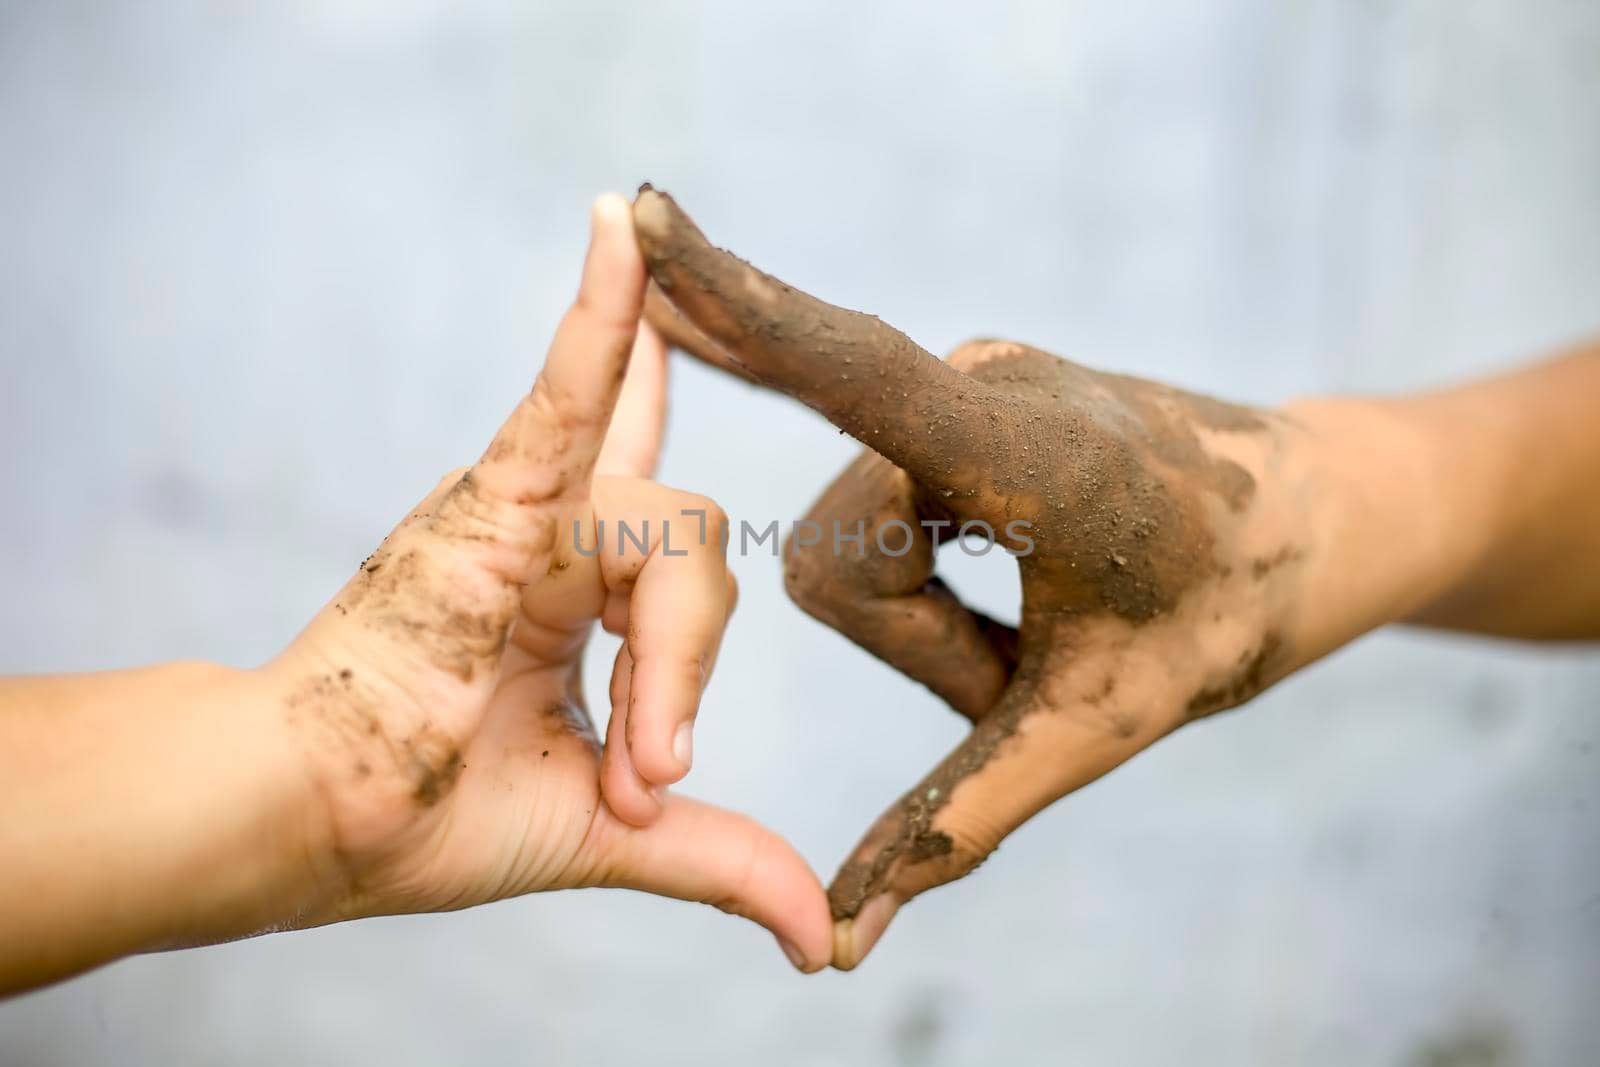 Concept of equality, respect, employment, deal, business with the symbol of handshake b/w a farmer with a hand having mud and a businessman's hand. by mirzamlk